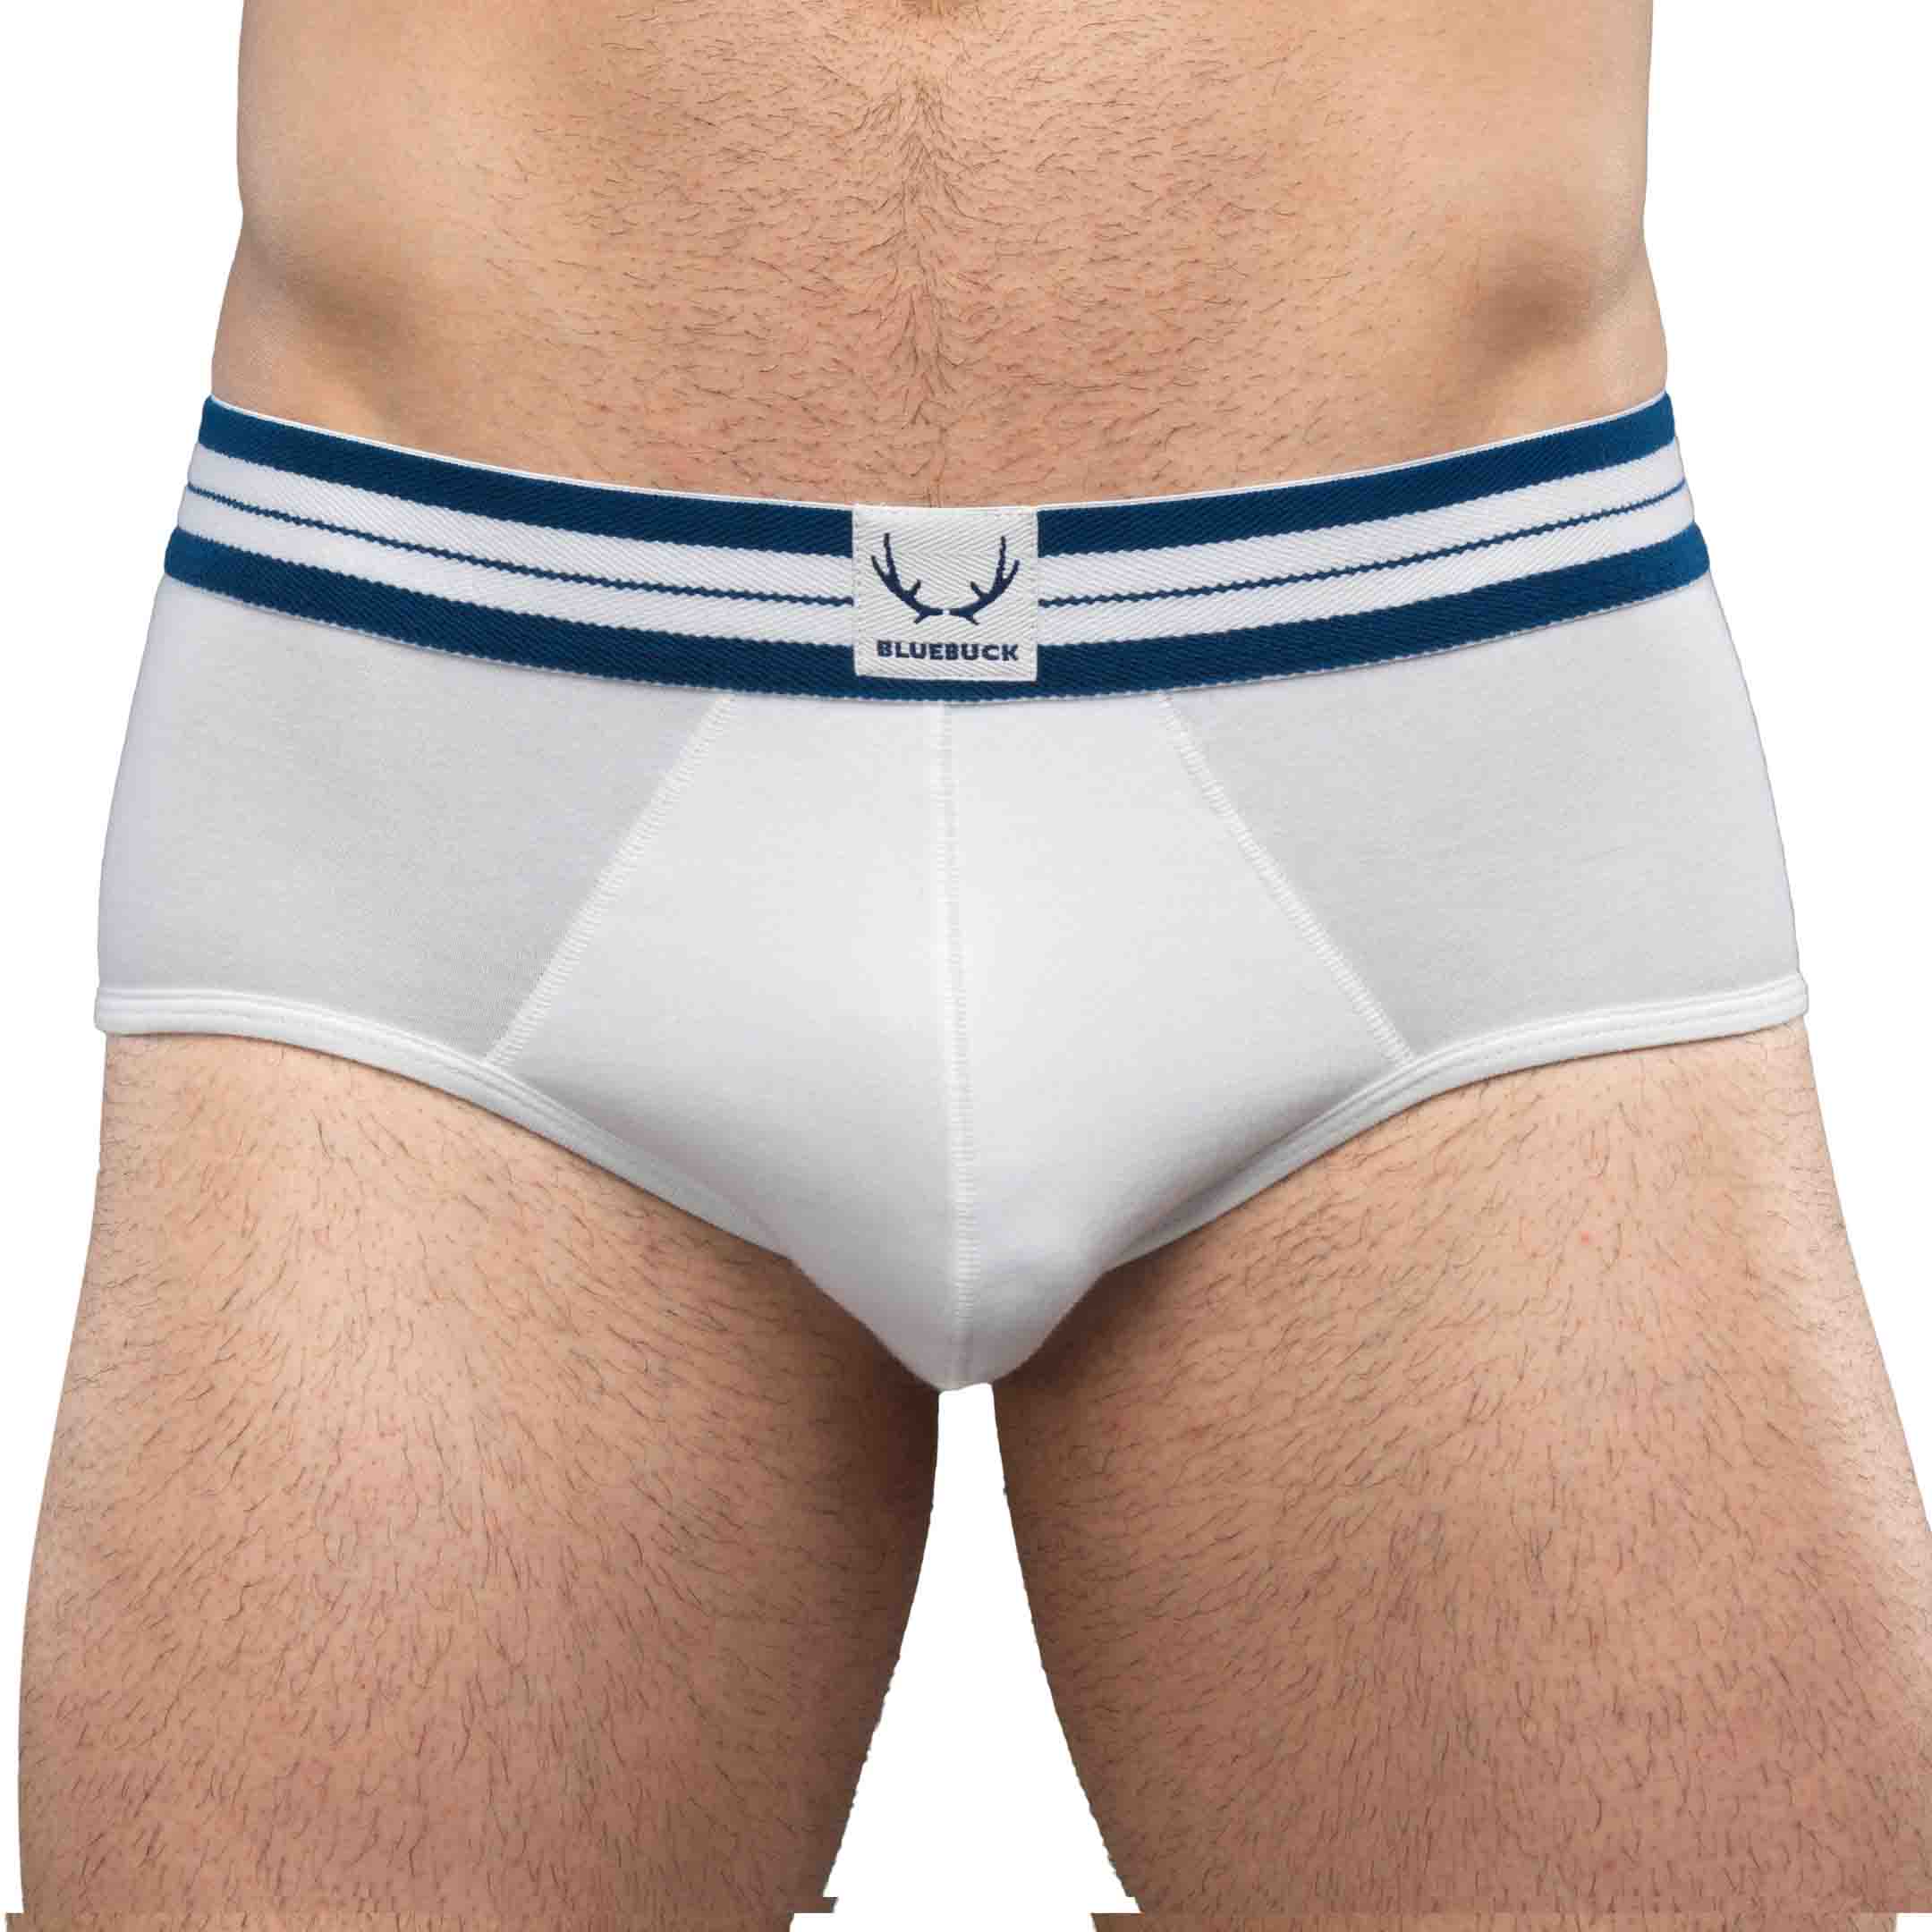 White underpants made of organic cotton from Bluebuck